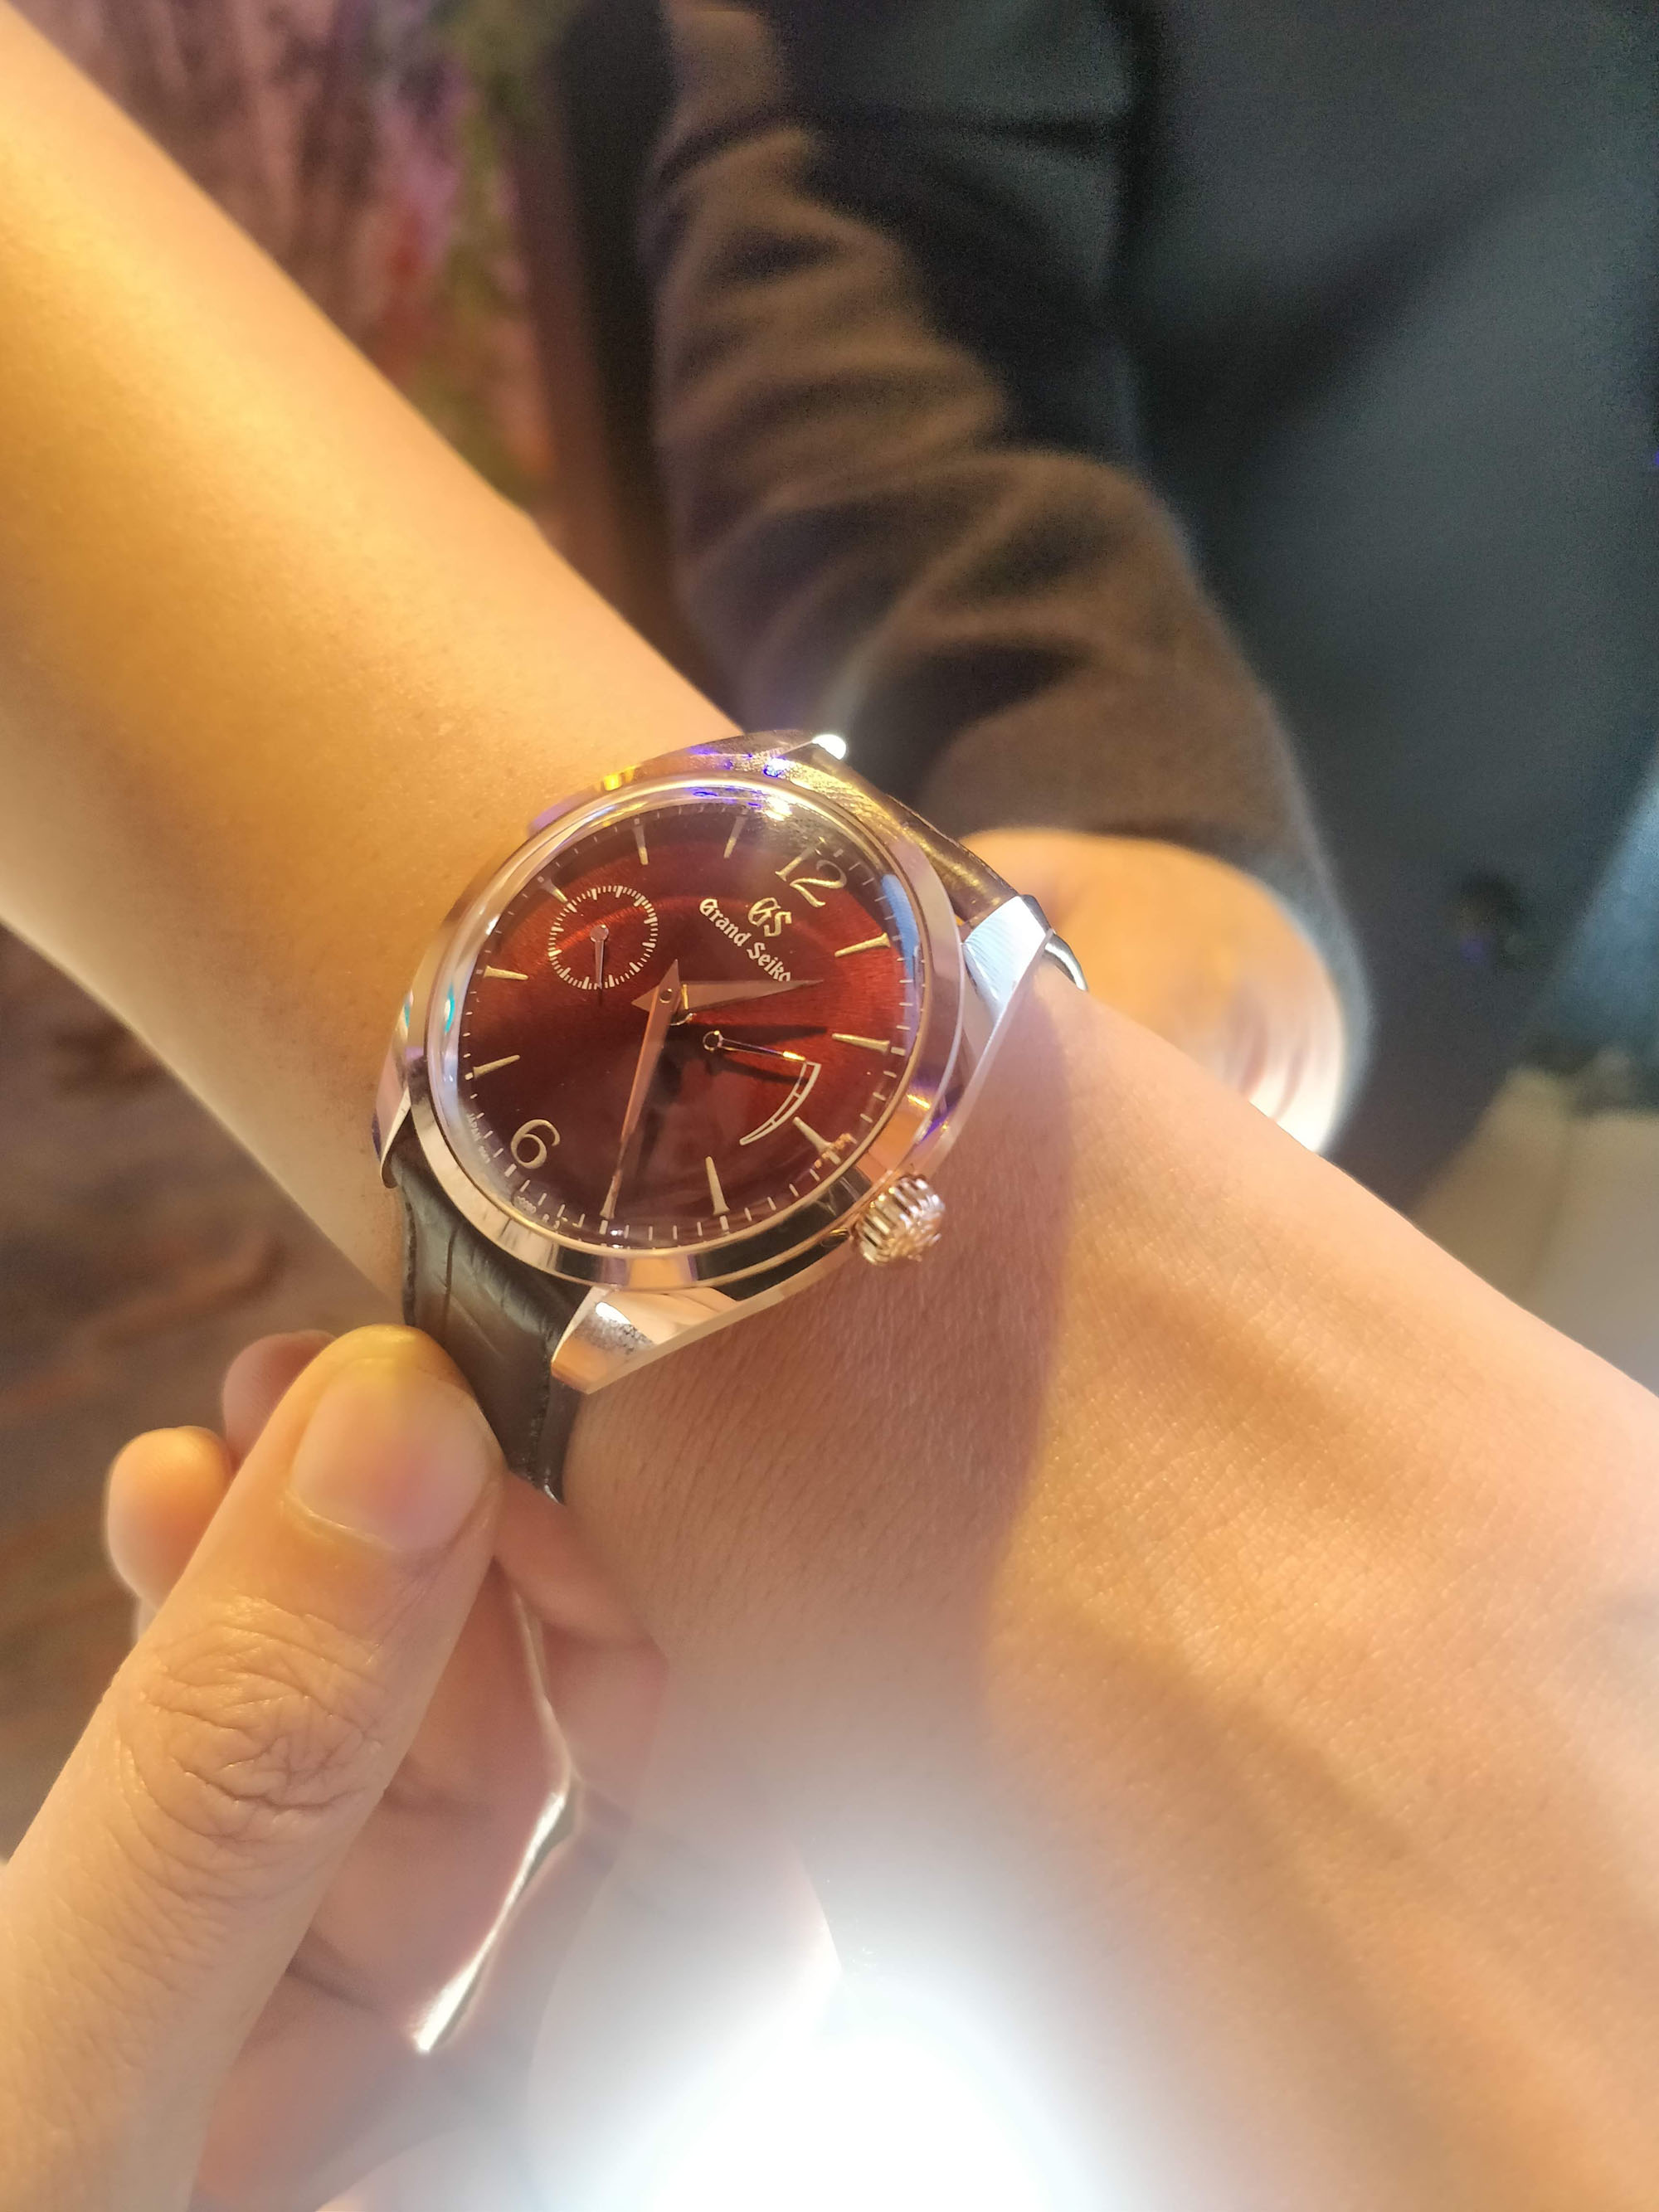 Limited edition Grand Seiko with Urushi dial